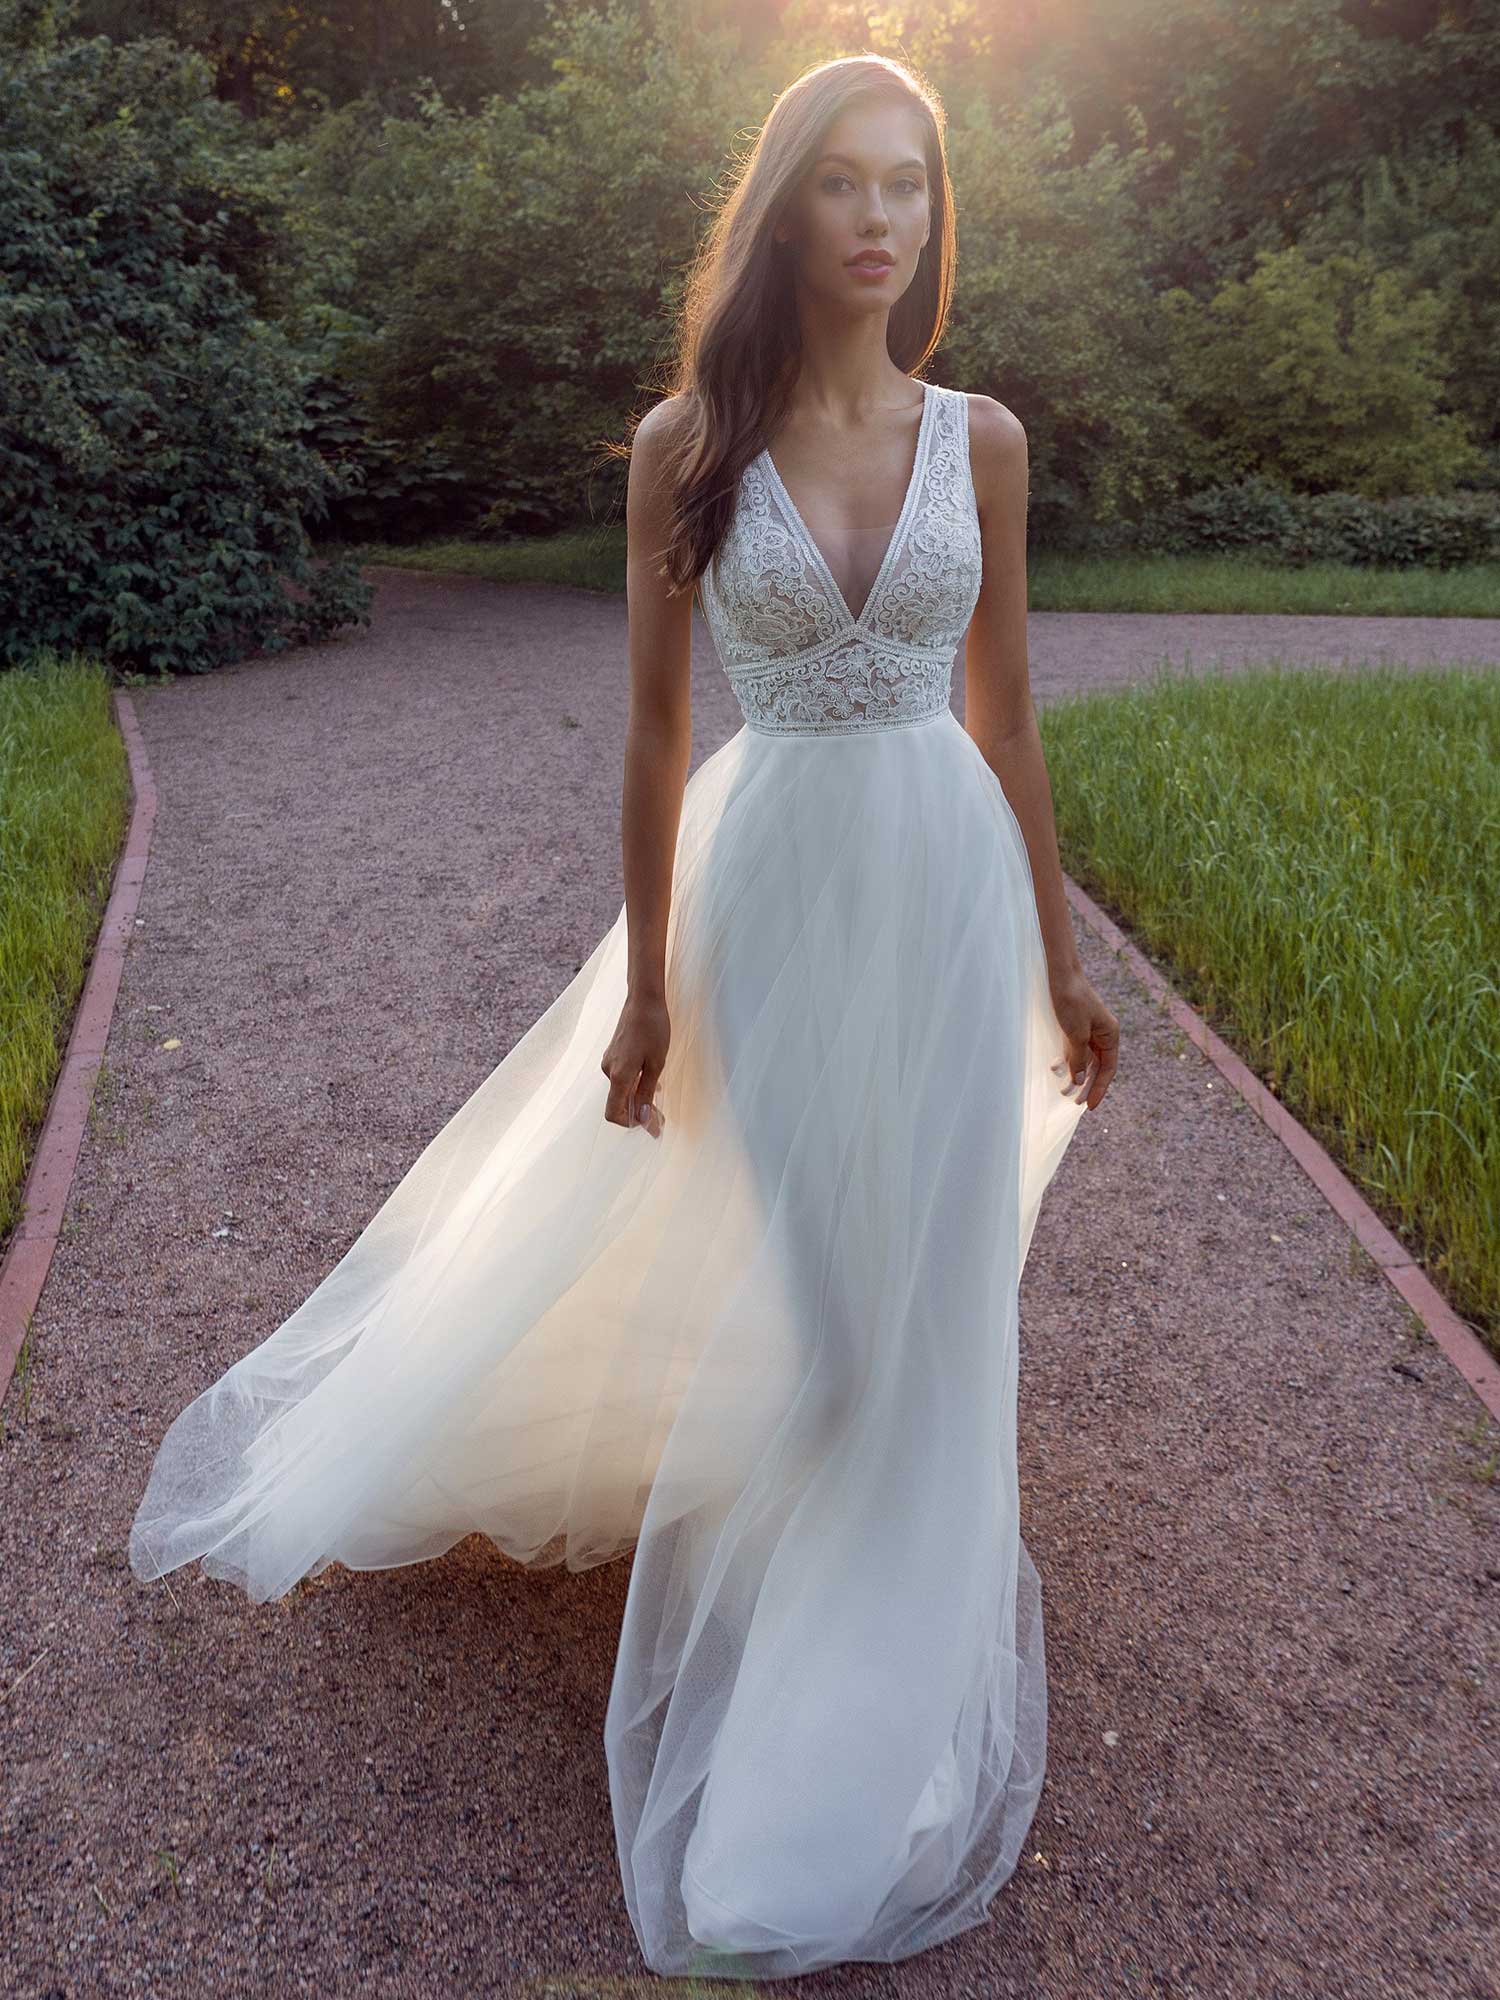 A-line wedding dress with a deep V-neckline lace bodice and illusion back